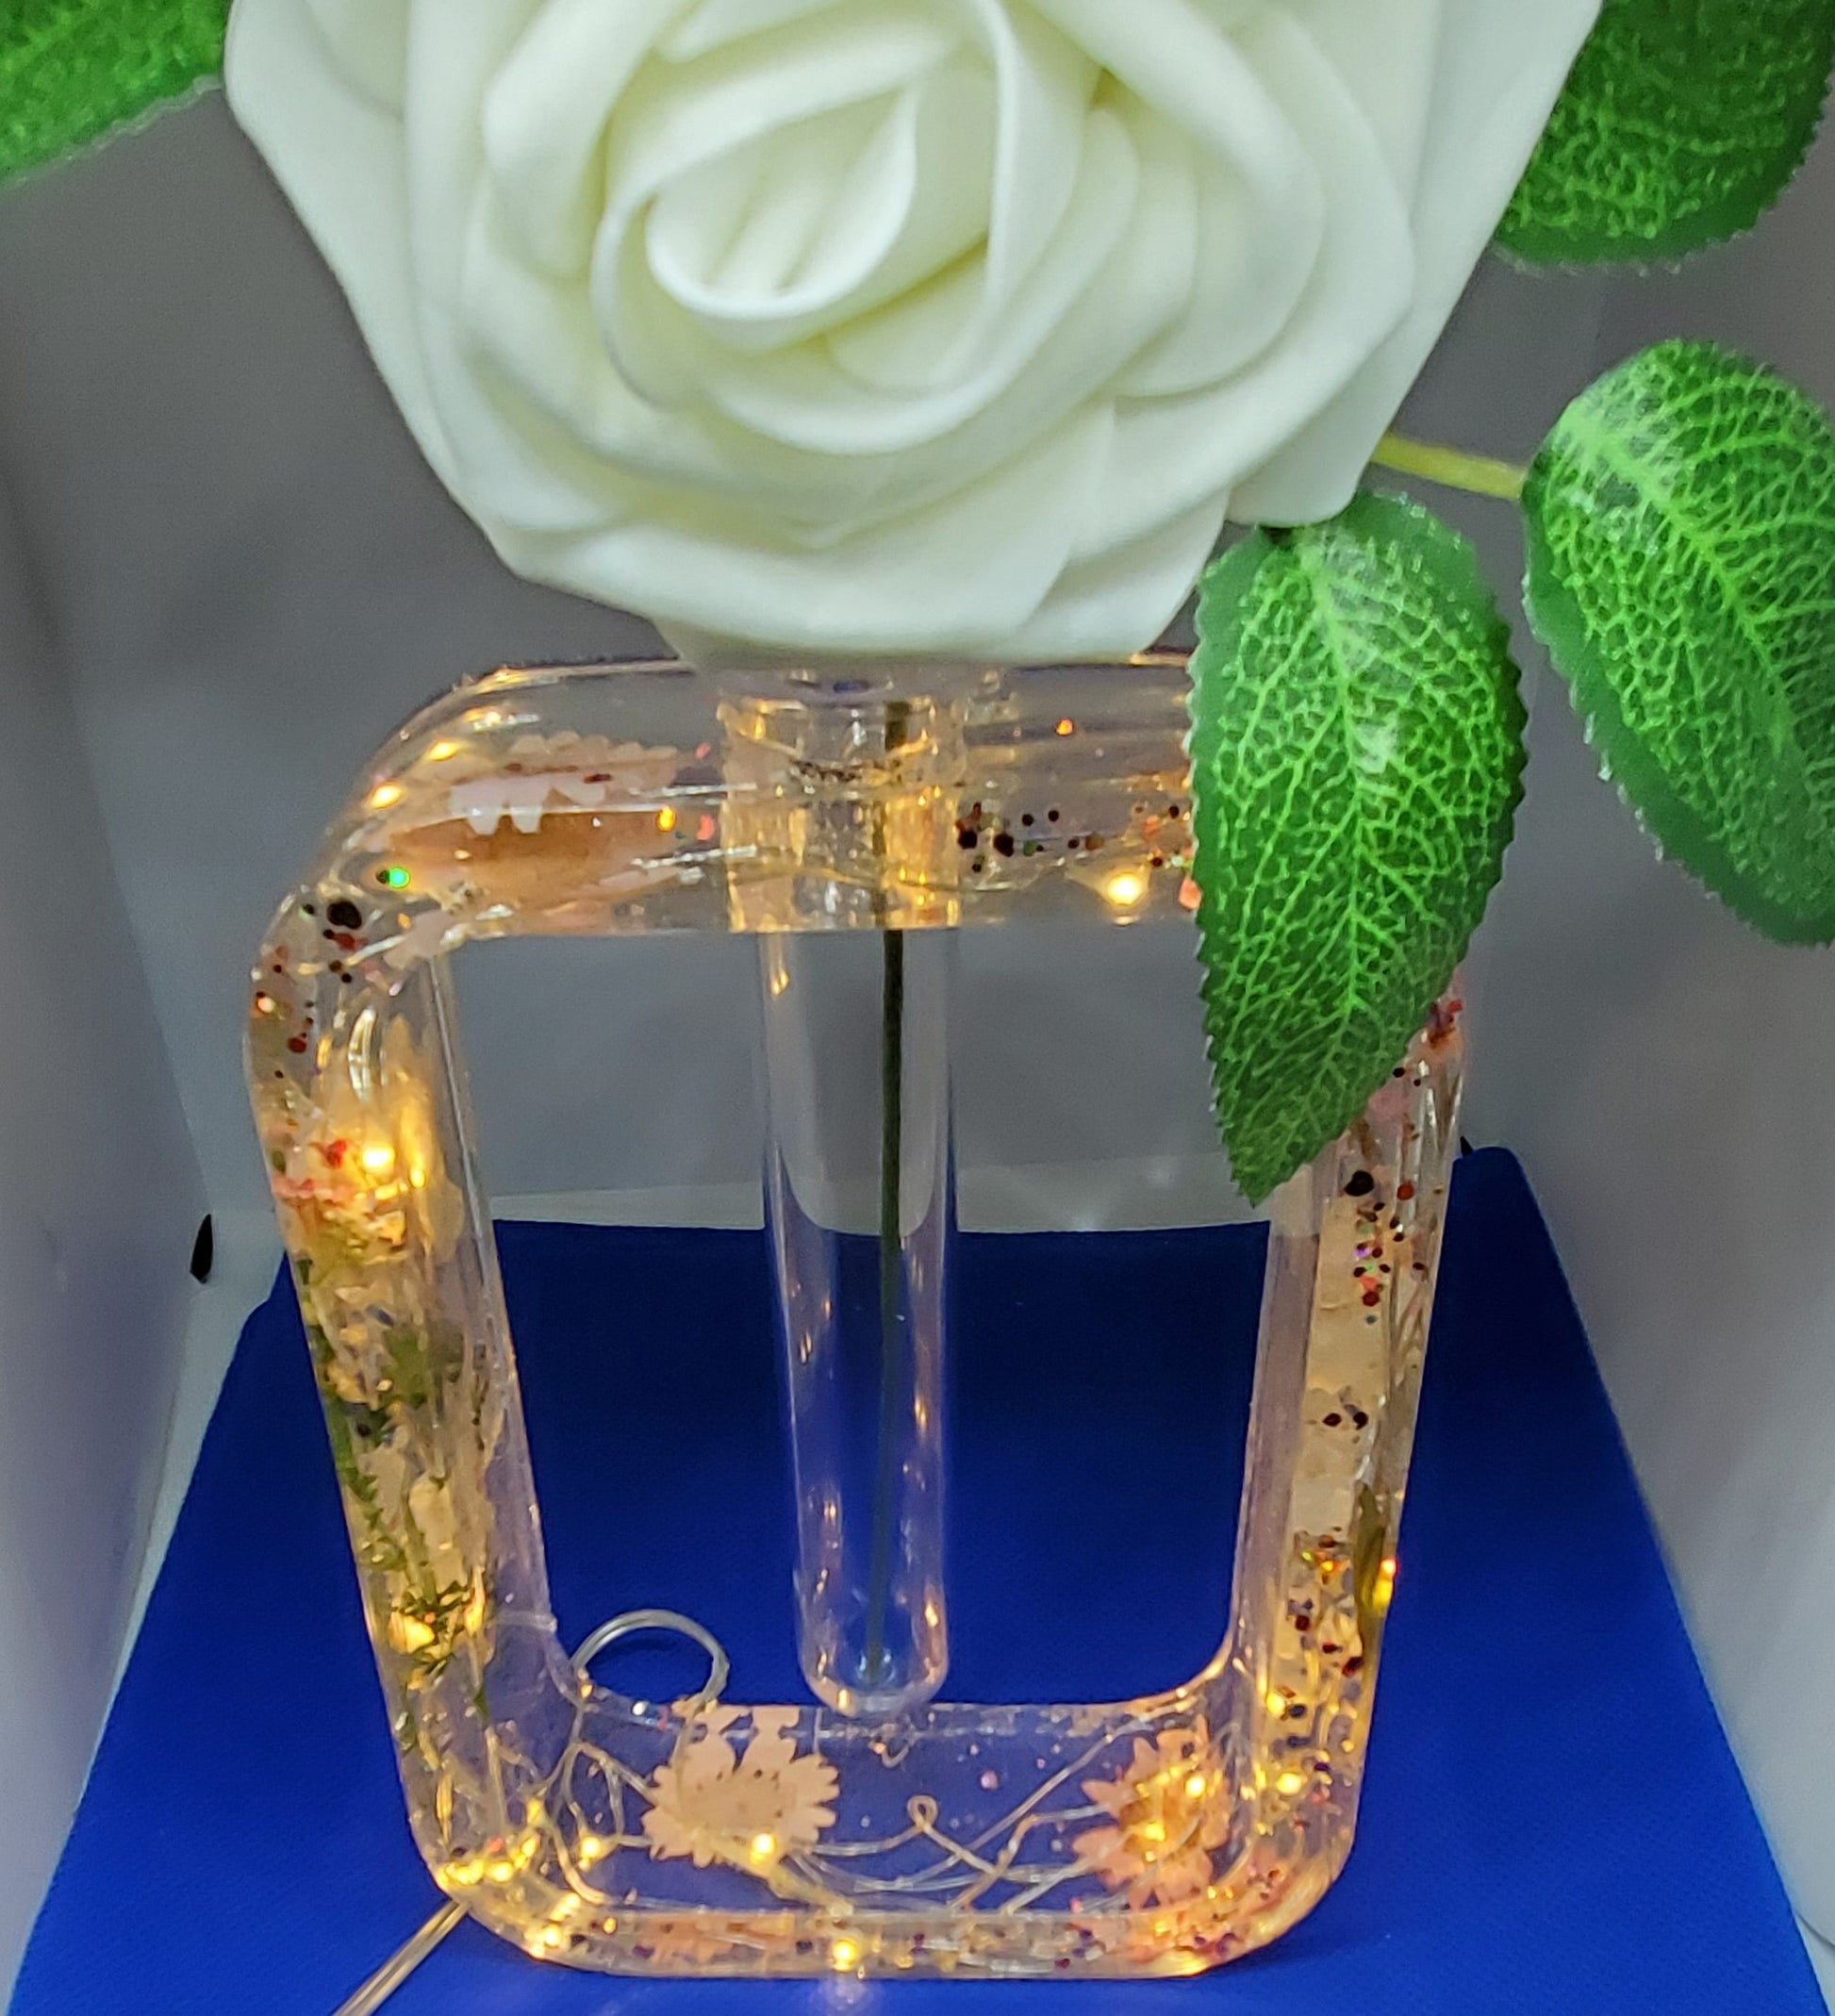 Beautiful flower vase with lights, butterflies and flowers.